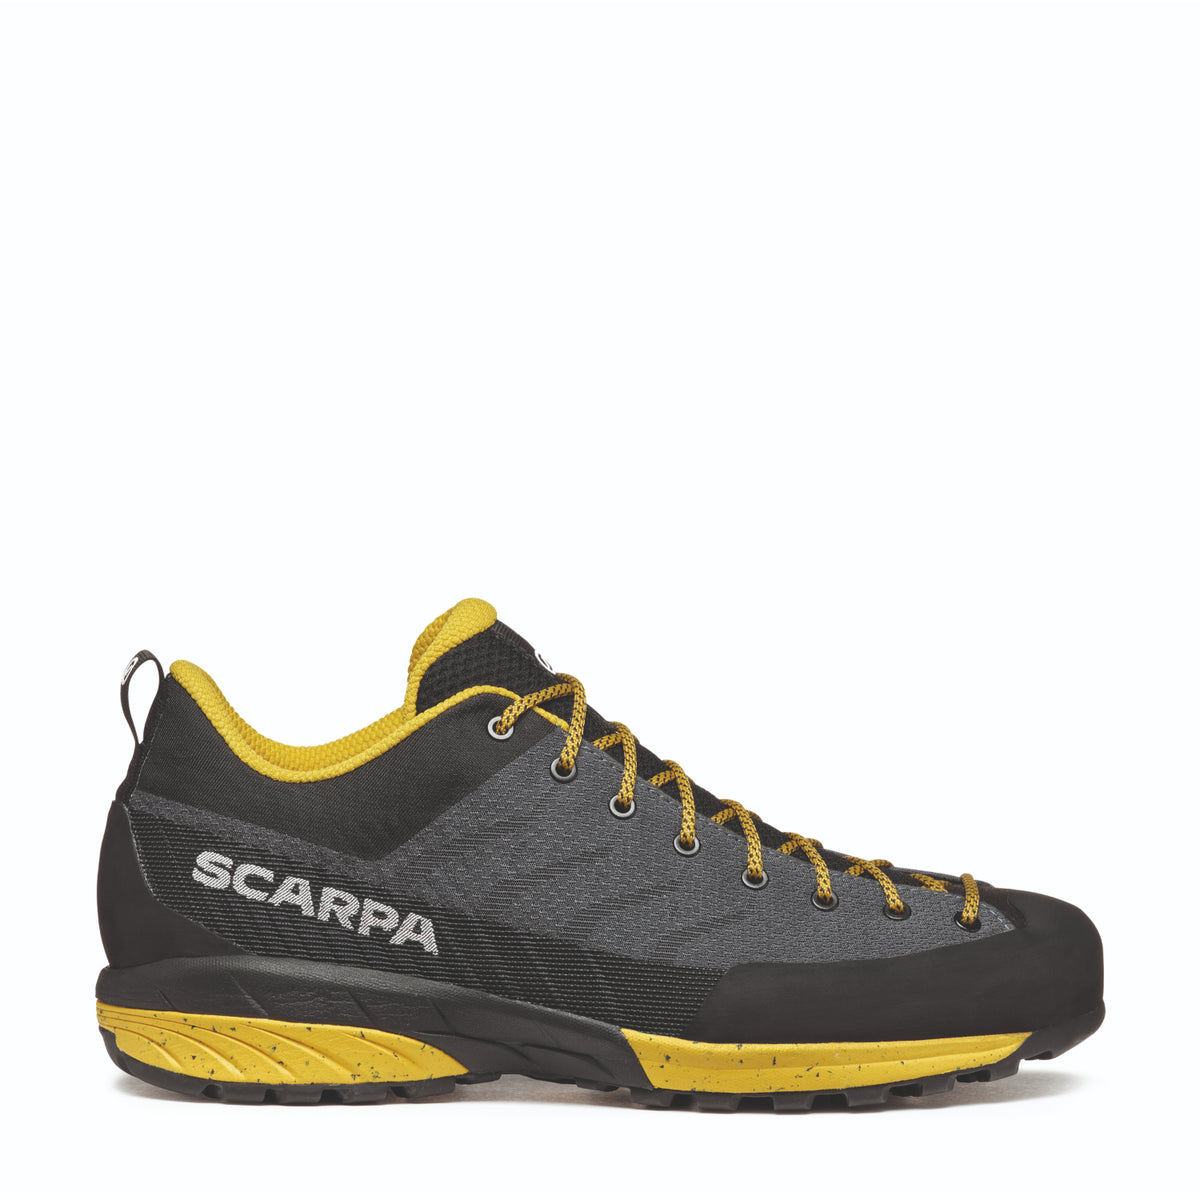 Scarpa Mescalito Planet approach shoes in grey/curry colour